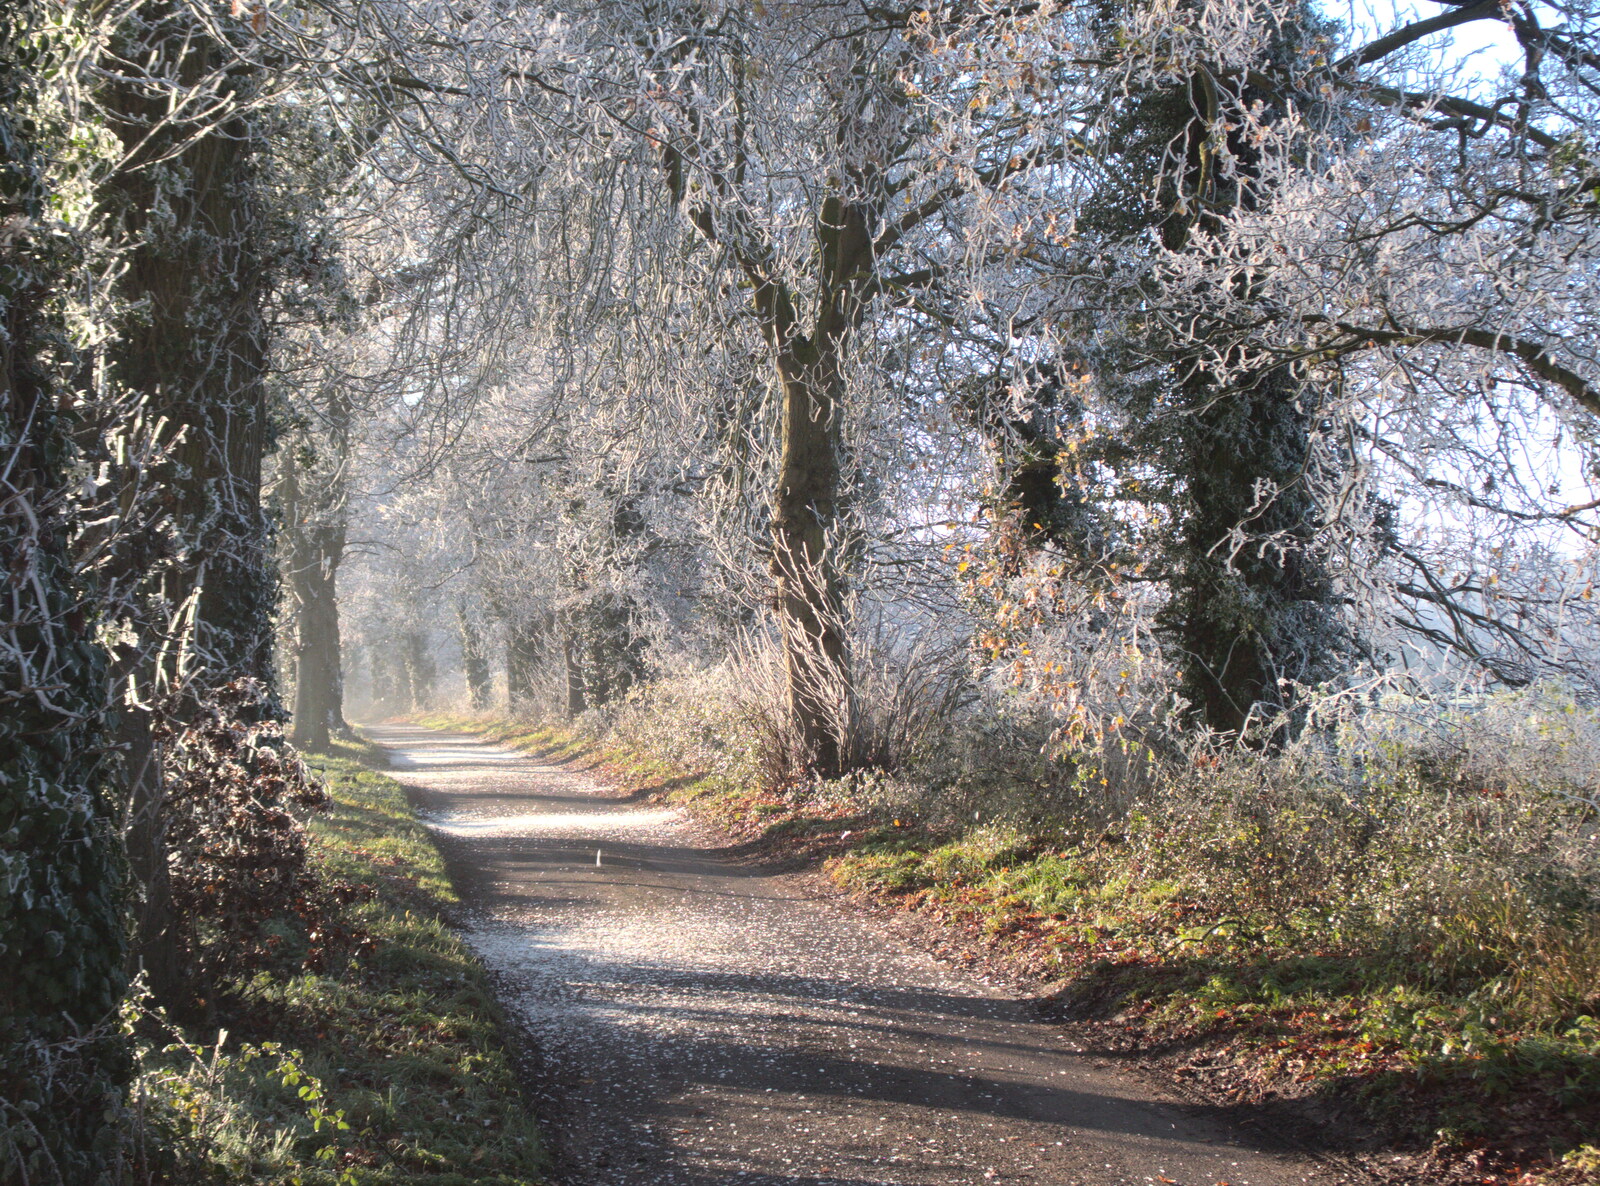 The road to Thornham from More Frosty Rides and the Old Mink Sheds, Brome, Suffolk - 10th December 2020